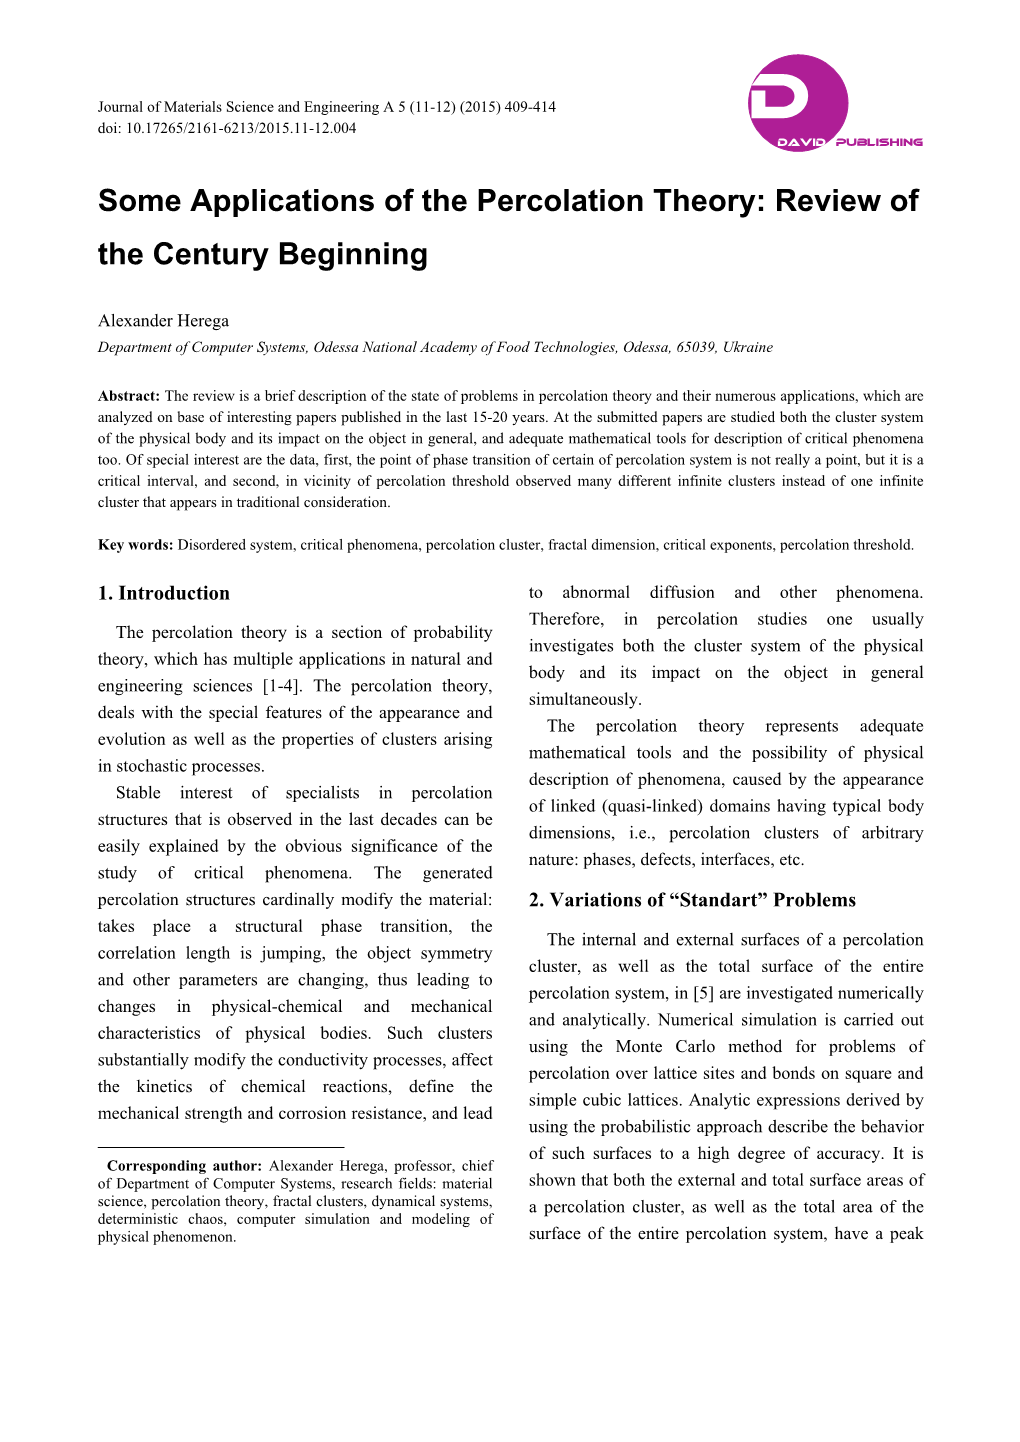 Some Applications of the Percolation Theory: Review of the Century Beginning